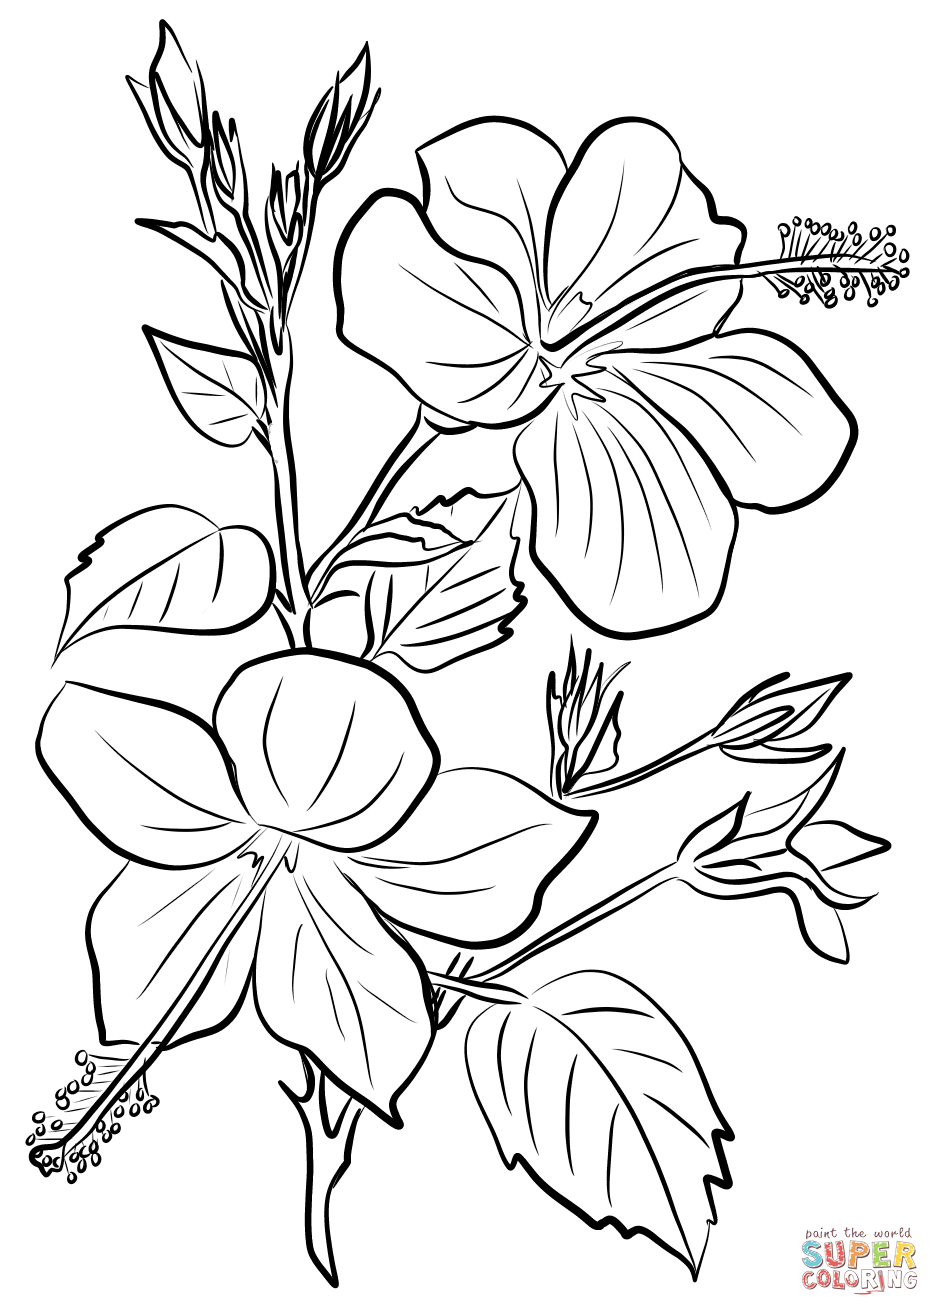 Hibiscus Flower Coloring Pages Hibiscus Coloring Page Free Printable Coloring Pages